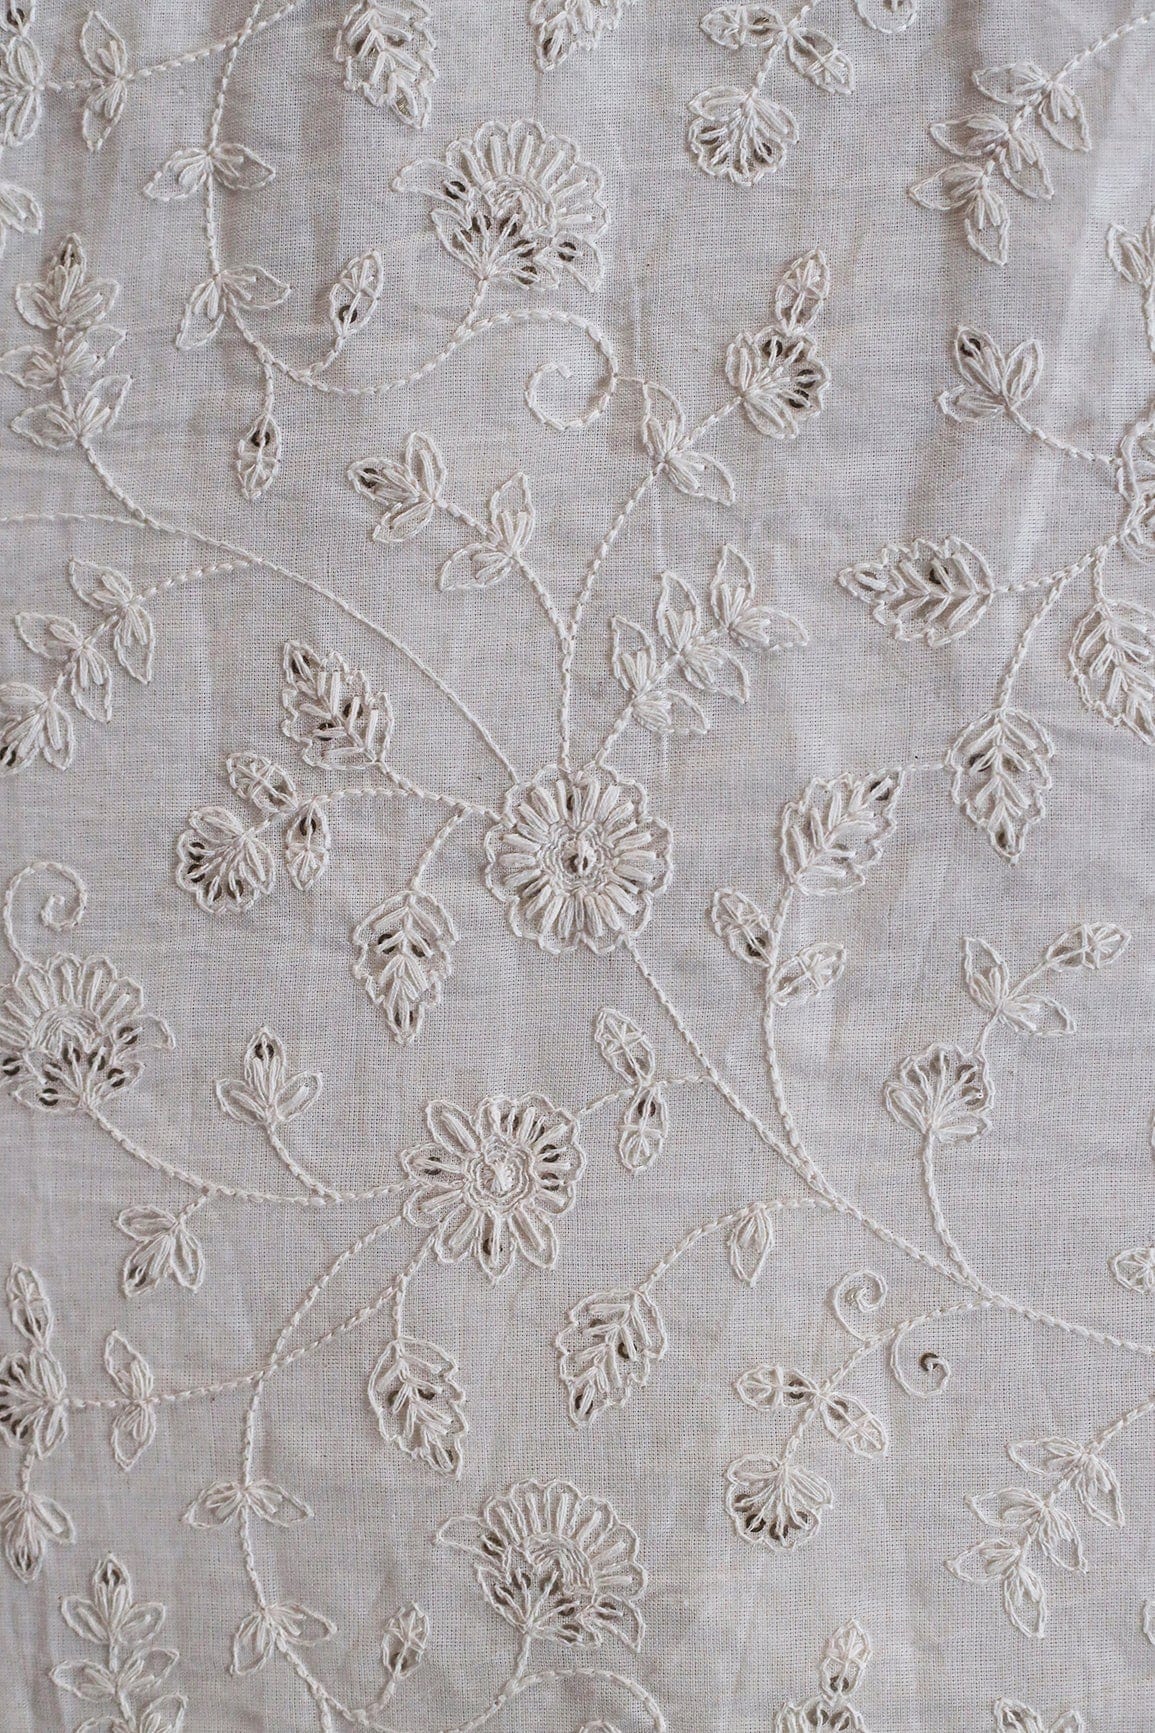 doeraa Embroidery Fabrics Beautiful White Thread With Gold Sequins Floral Embroidery Work On White Cotton Fabric